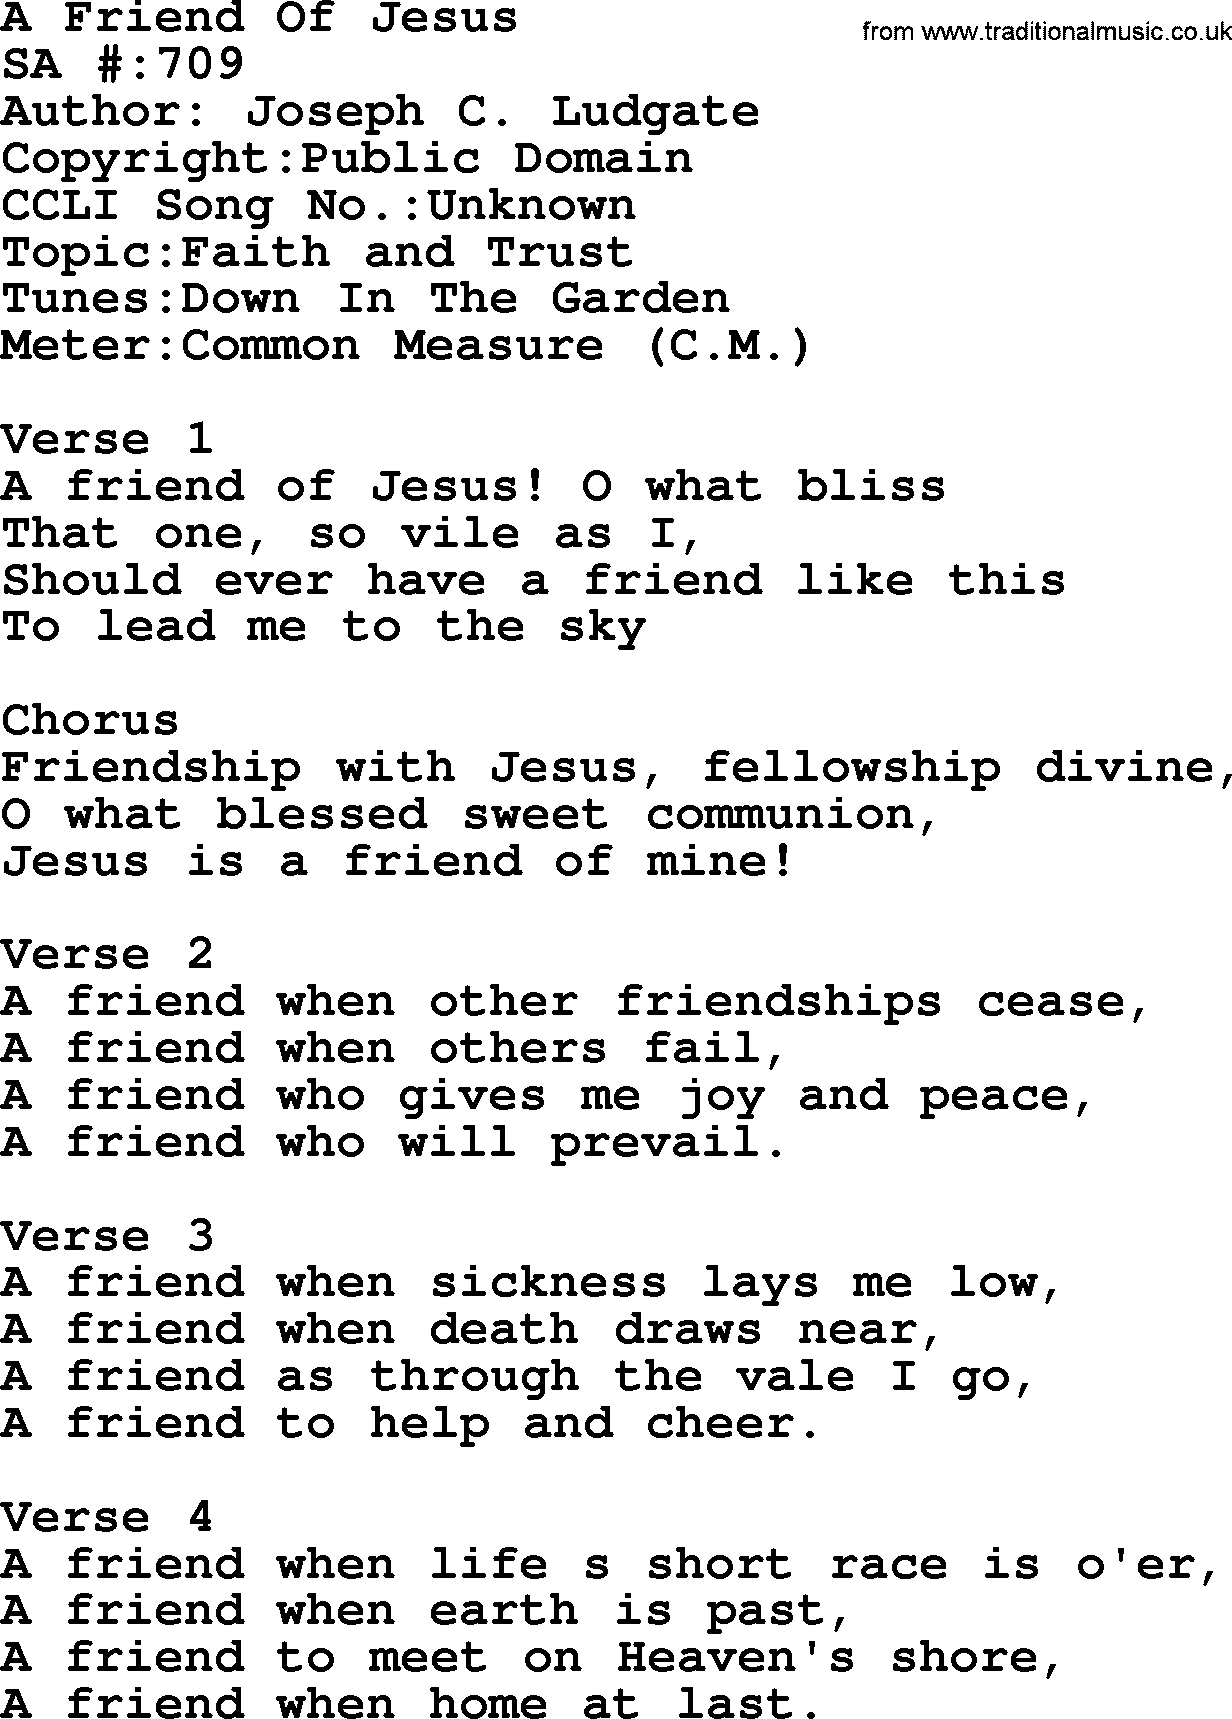 Salvation Army Hymnal, title: A Friend Of Jesus, with lyrics and PDF,